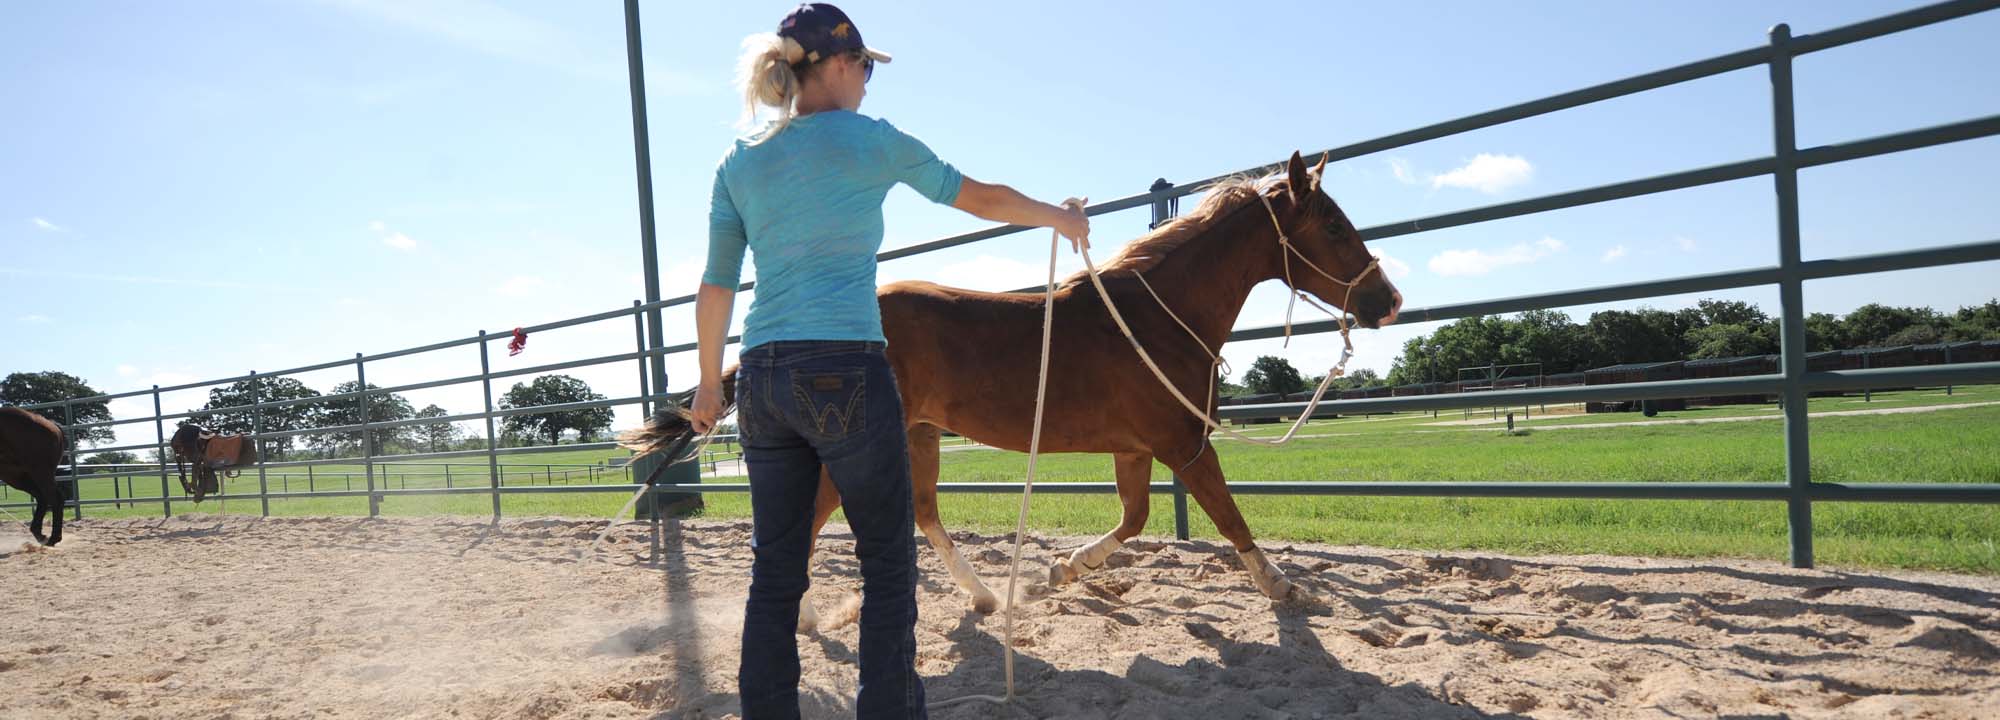 Tips for Training and Riding Paso Fino Horses: Positive Reinforcement 